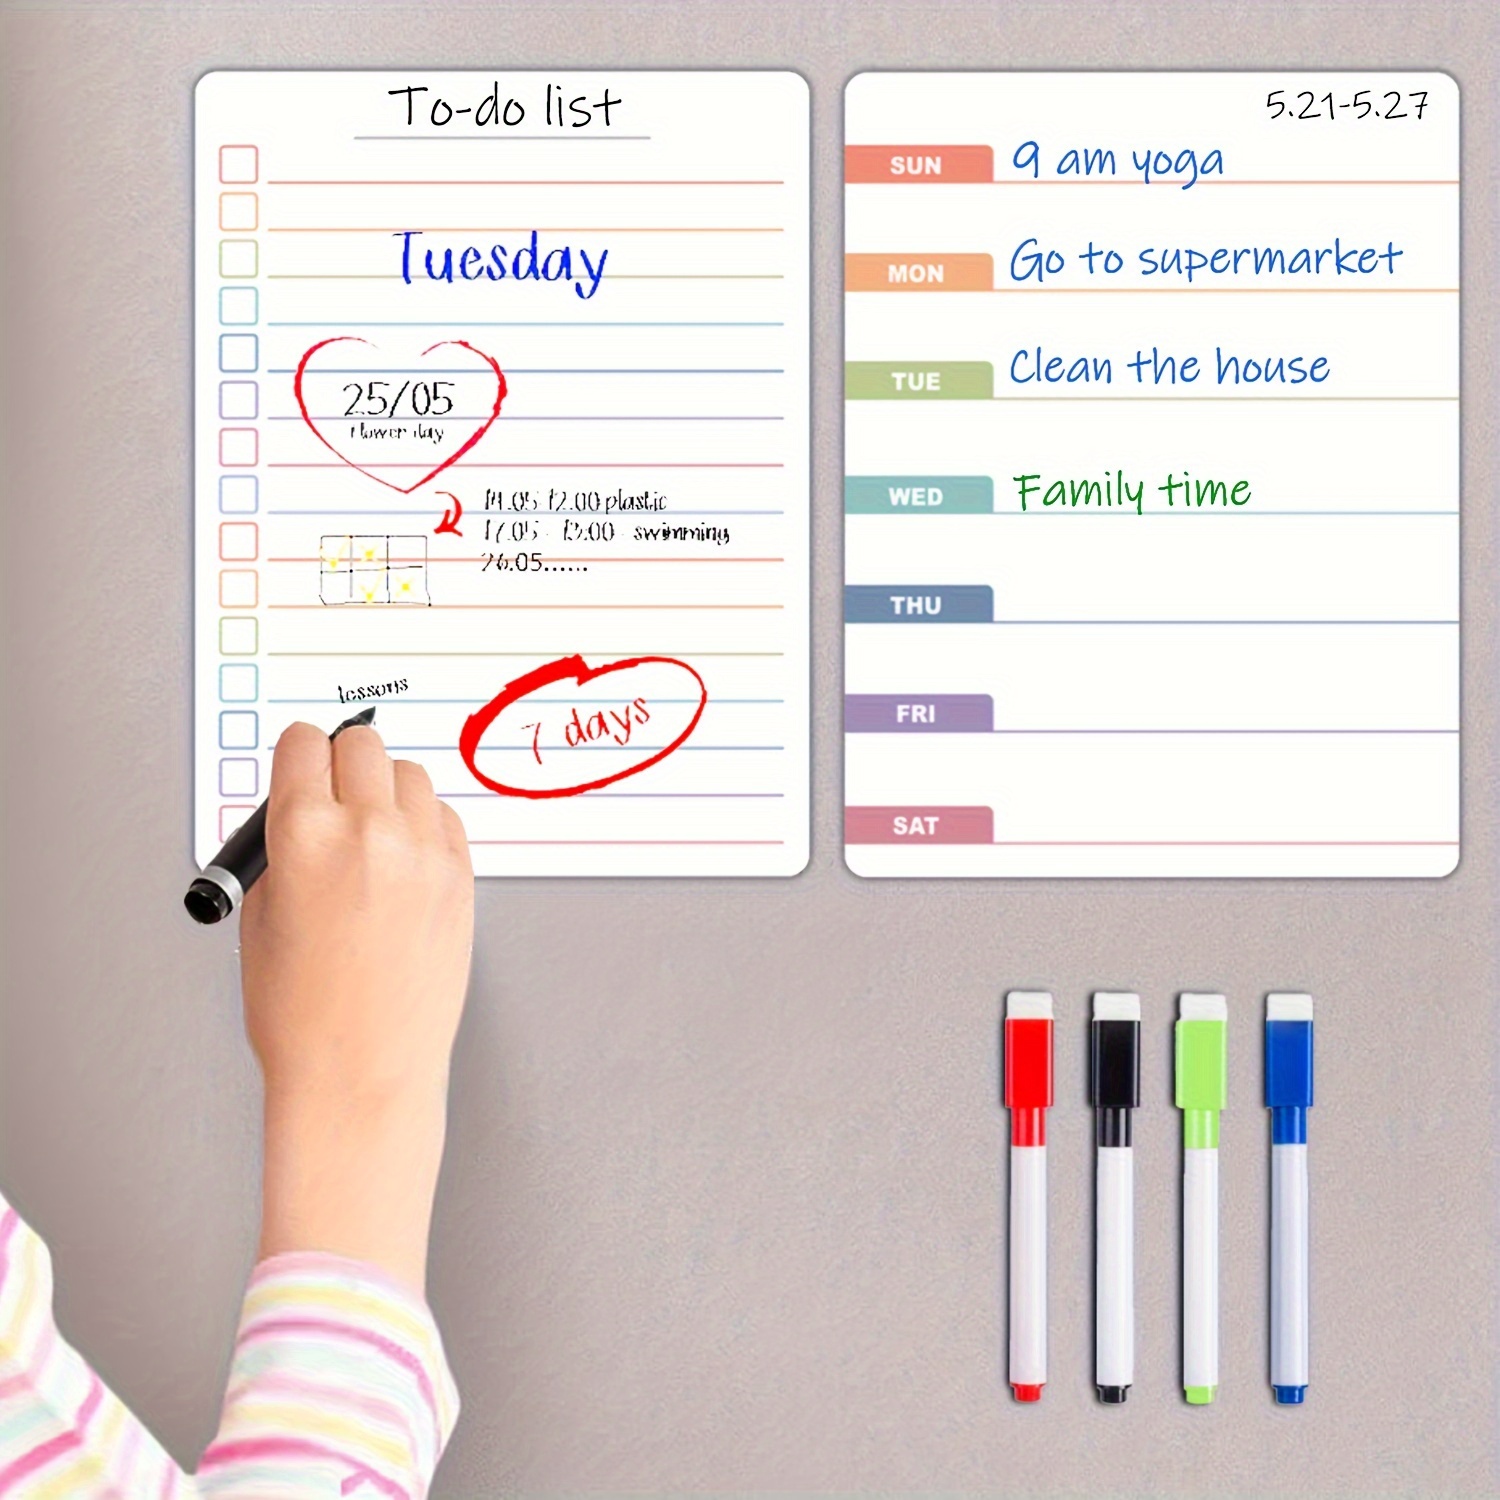 Magnetic Menu Board For Kitchen - 5 Set Bundle - With Calendar Board,  Weekly To Do List, Pen